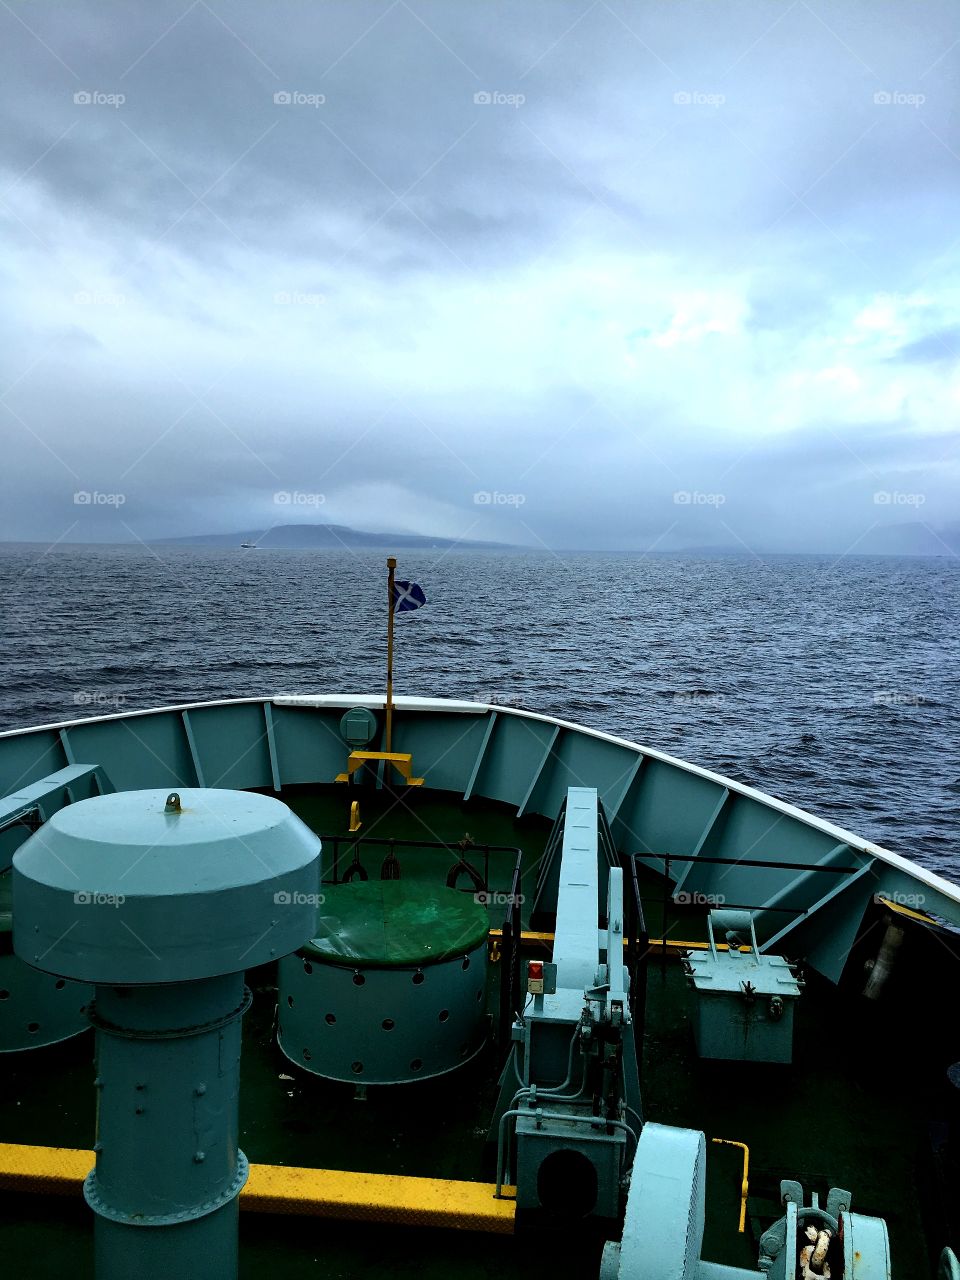 On the way to Island of Arran